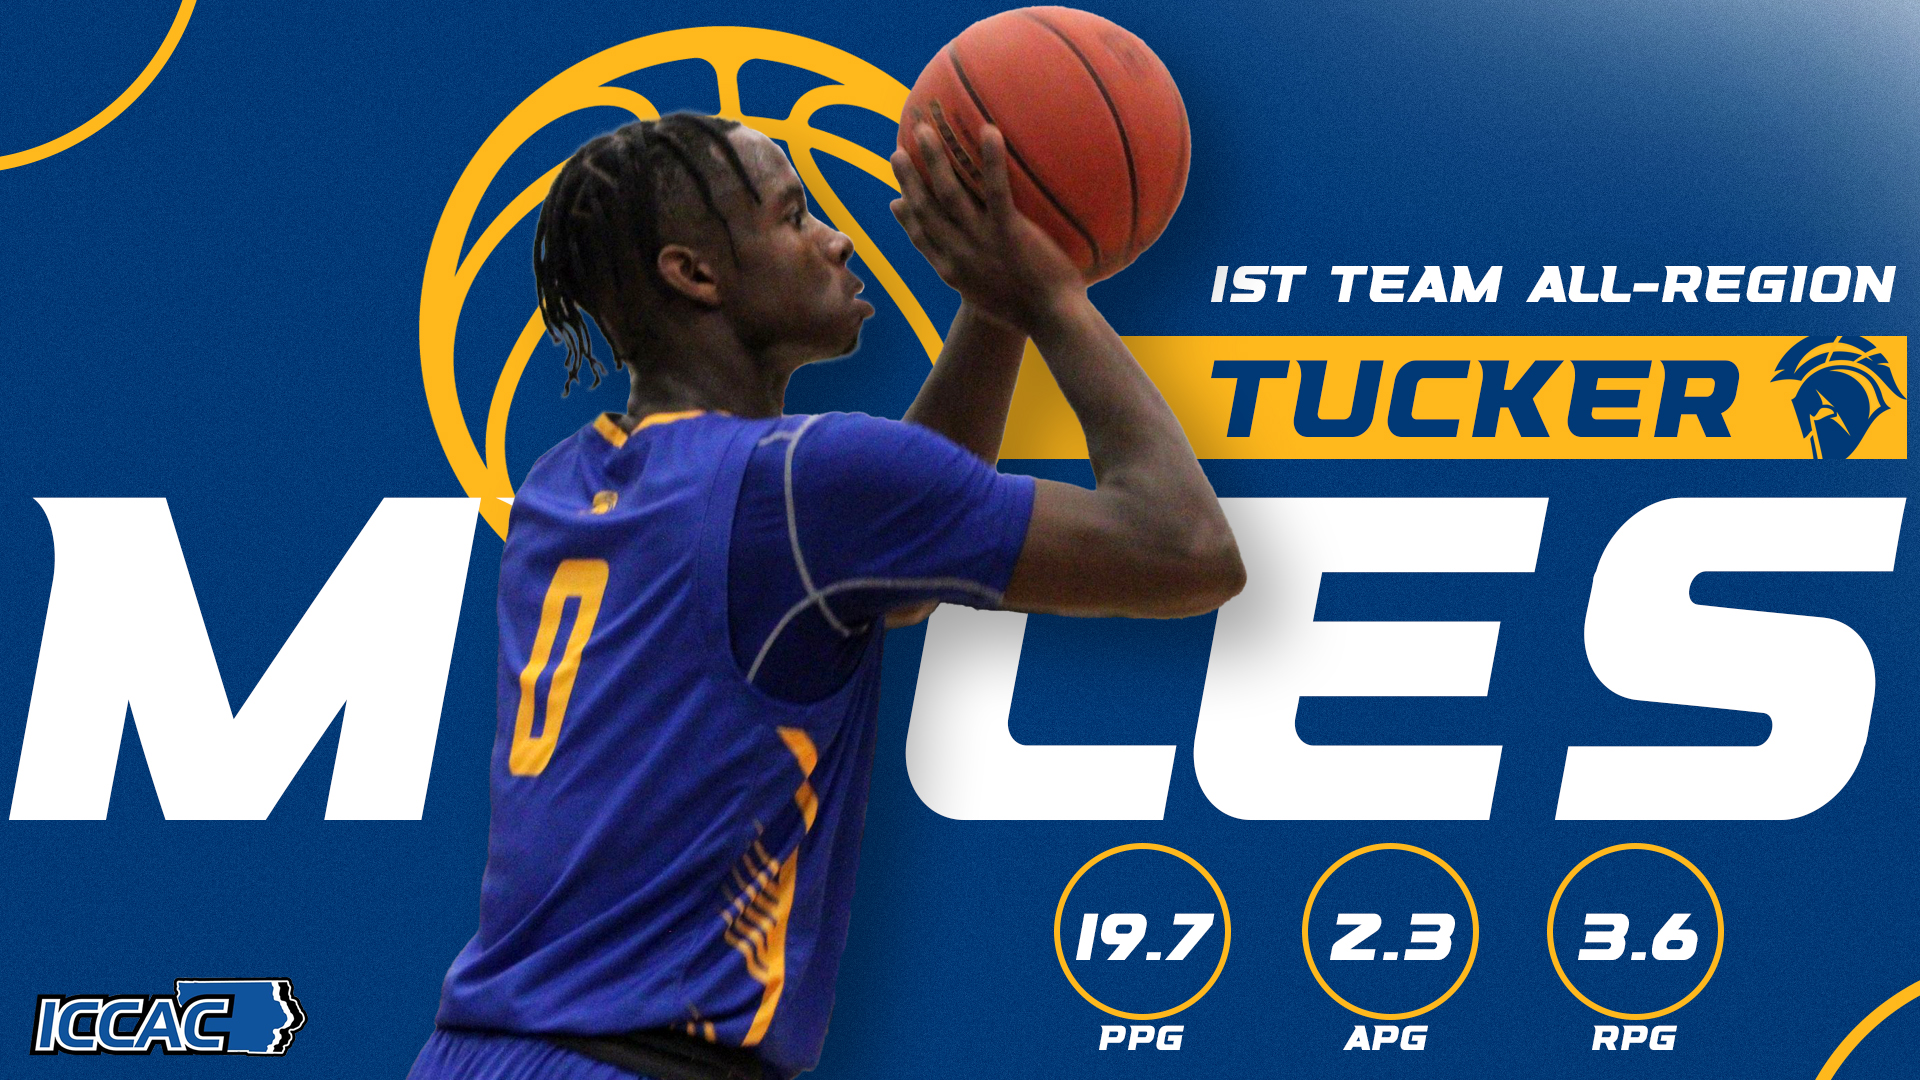 NIACC's Tucker earns first-team all-region honors